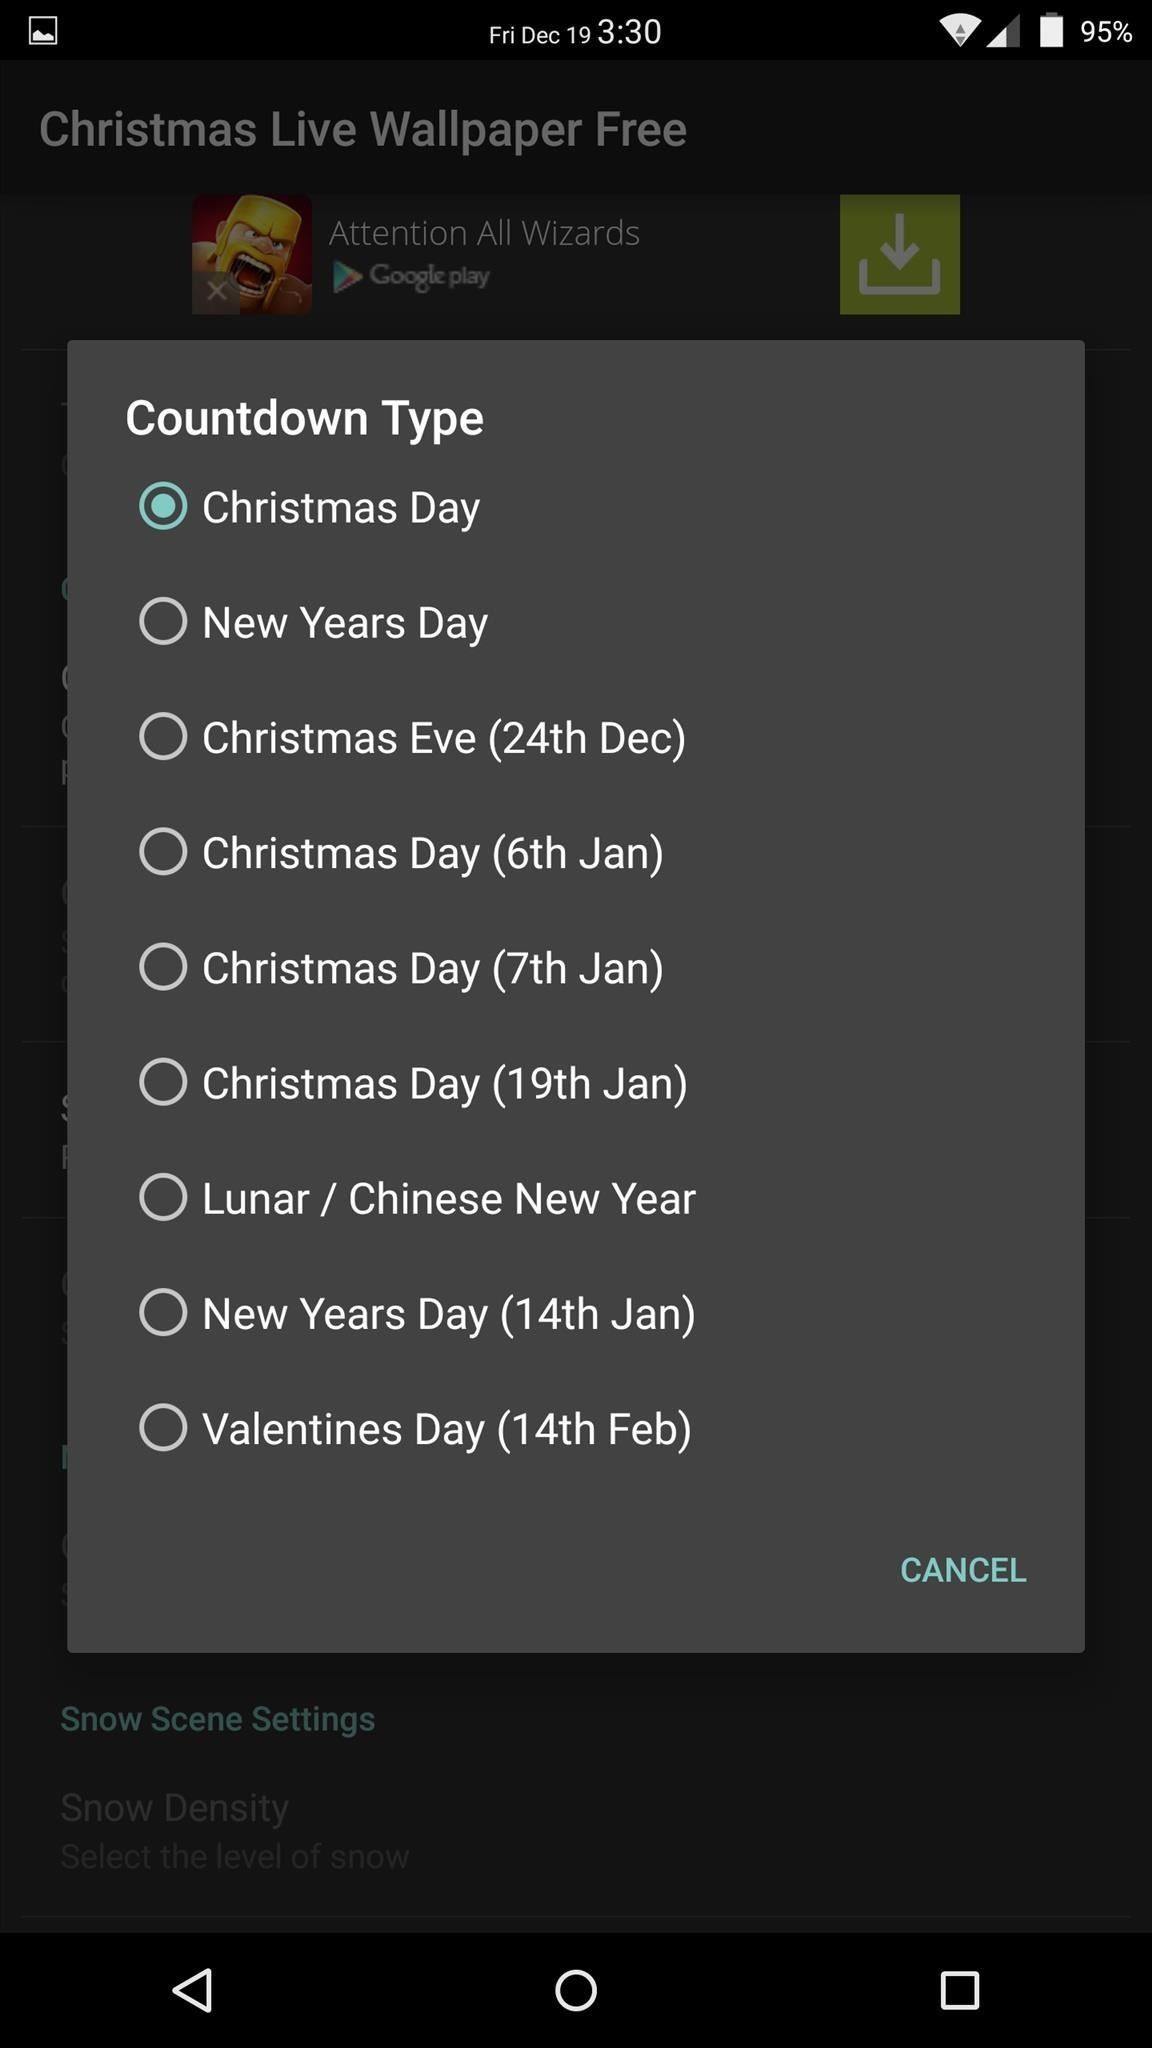 Now open the app, go to Settings Countdown Settings Countdown Type, and choose which holiday you want to count down toChristmas Eve, Christmas Day,